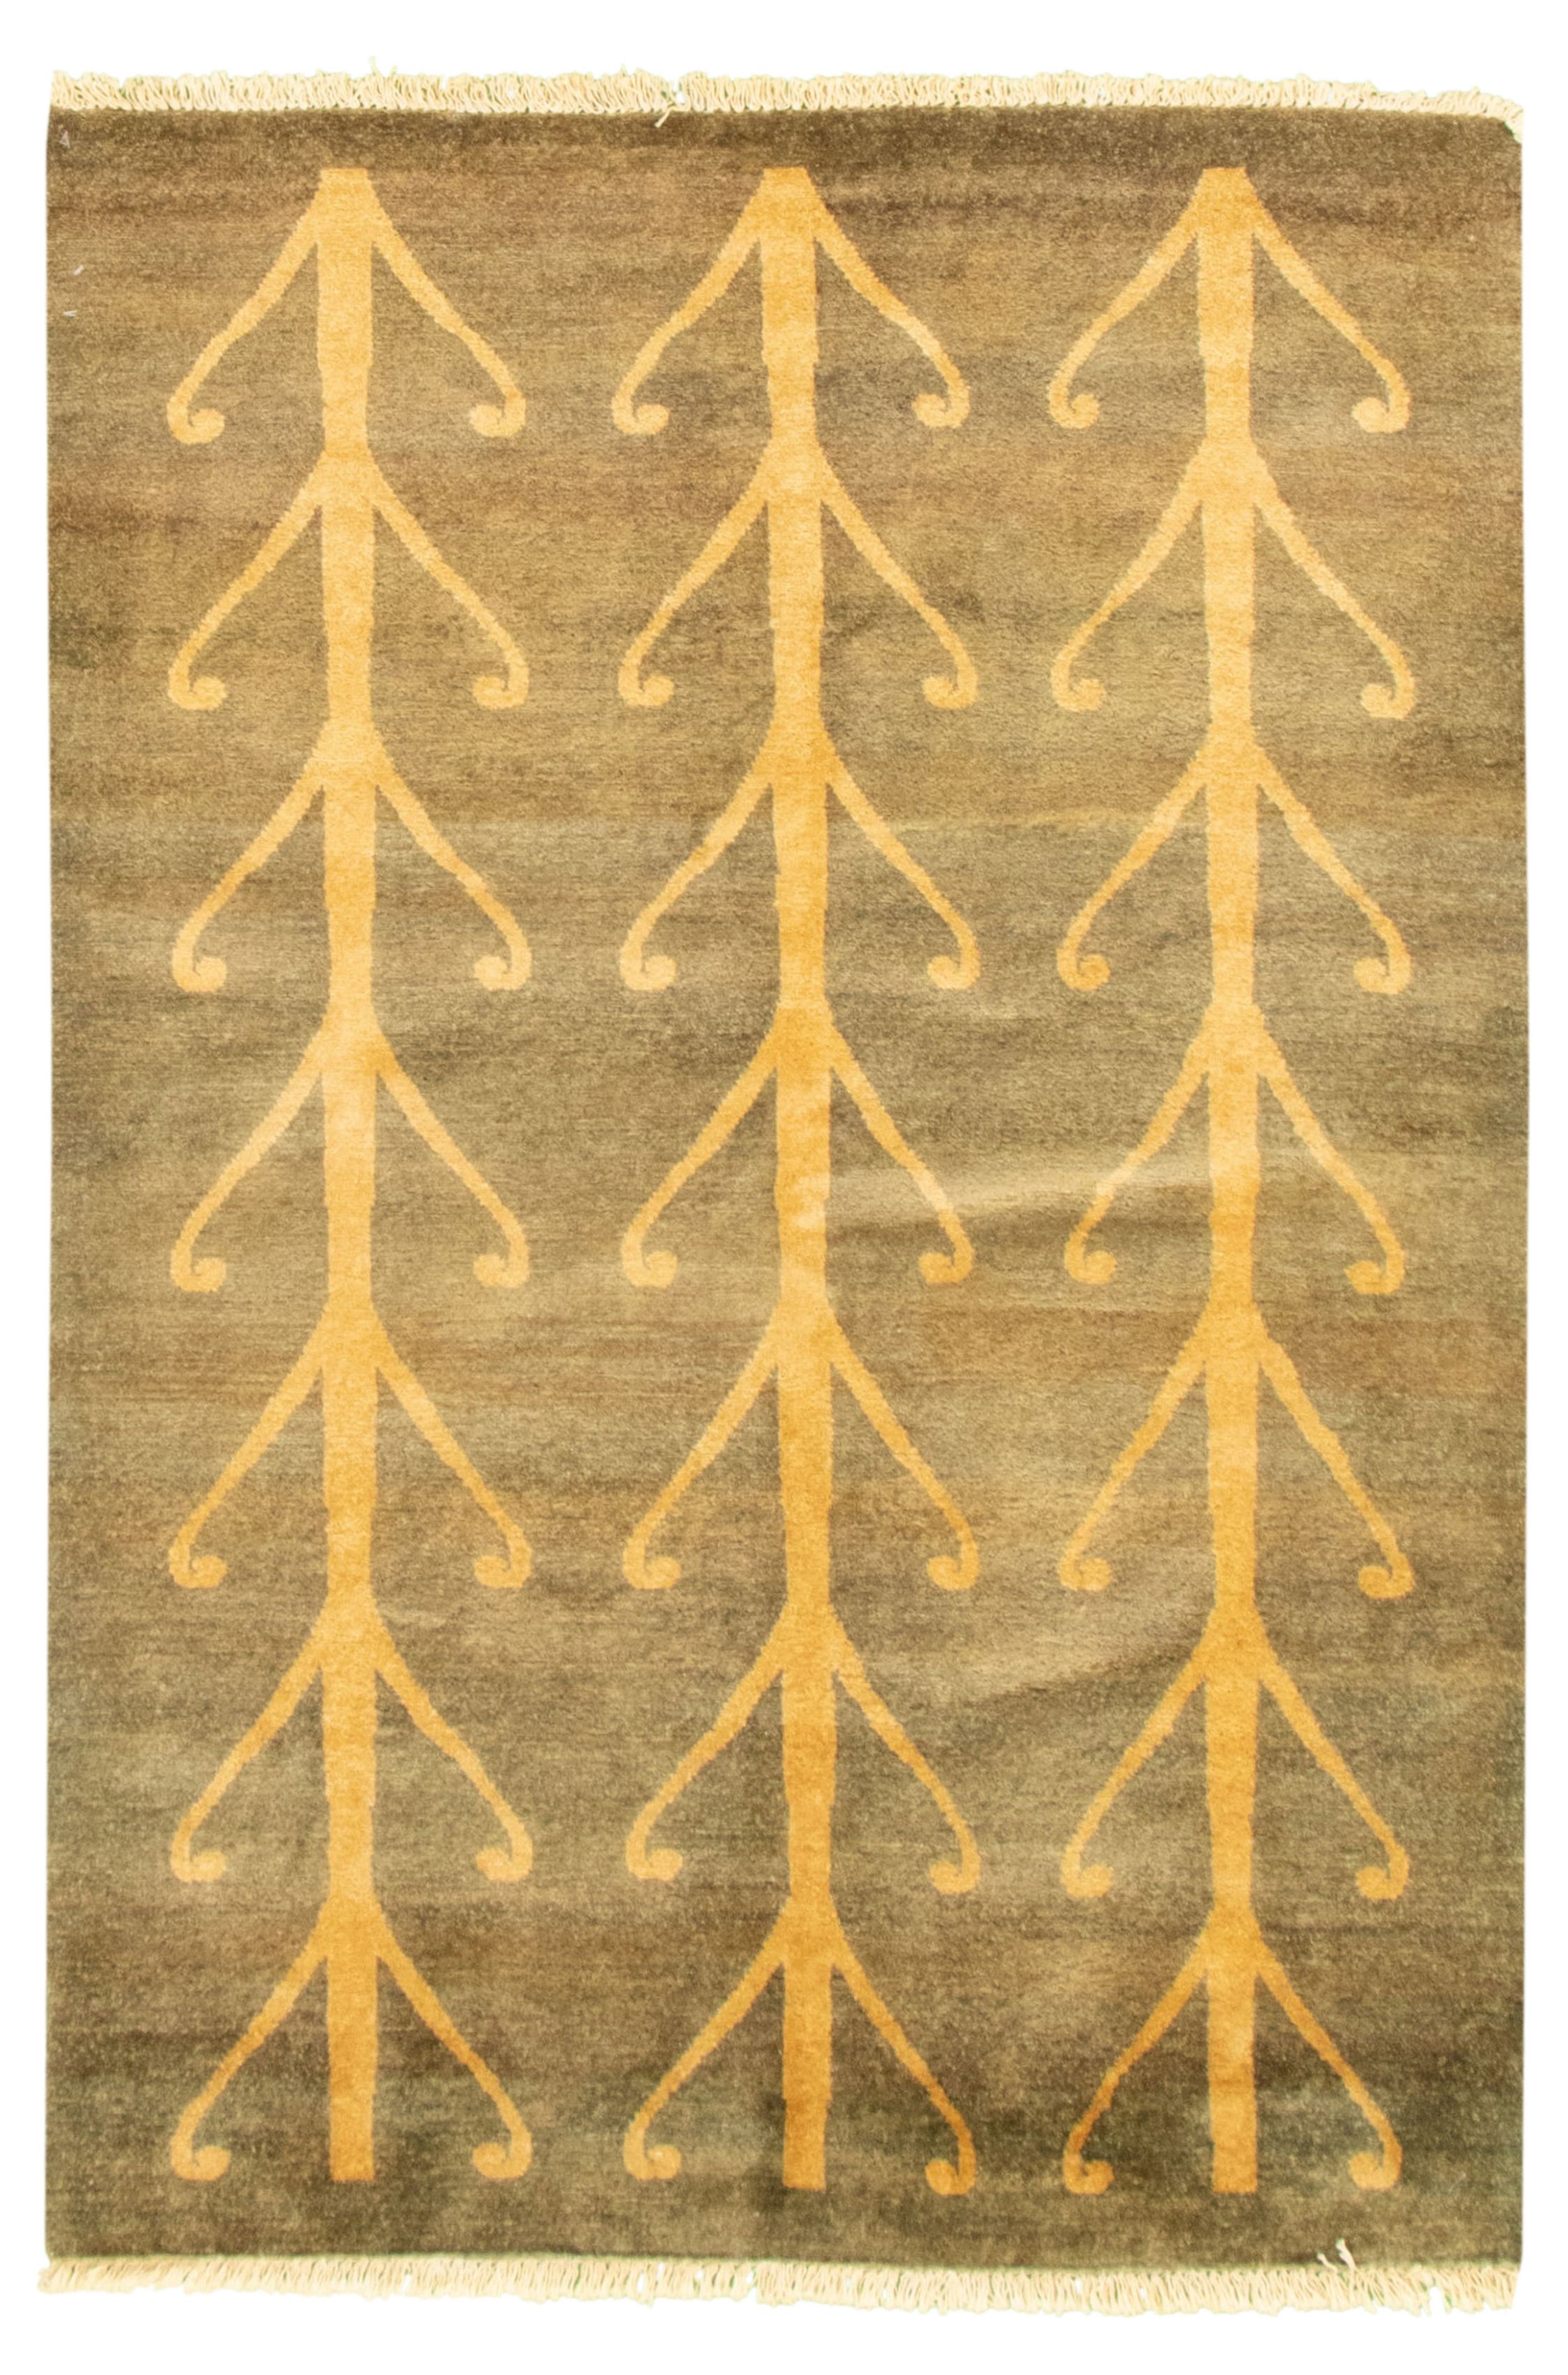 Hand-knotted Peshawar Ziegler Olive Wool Rug 4'3" x 5'10" Size: 4'3" x 5'10"  